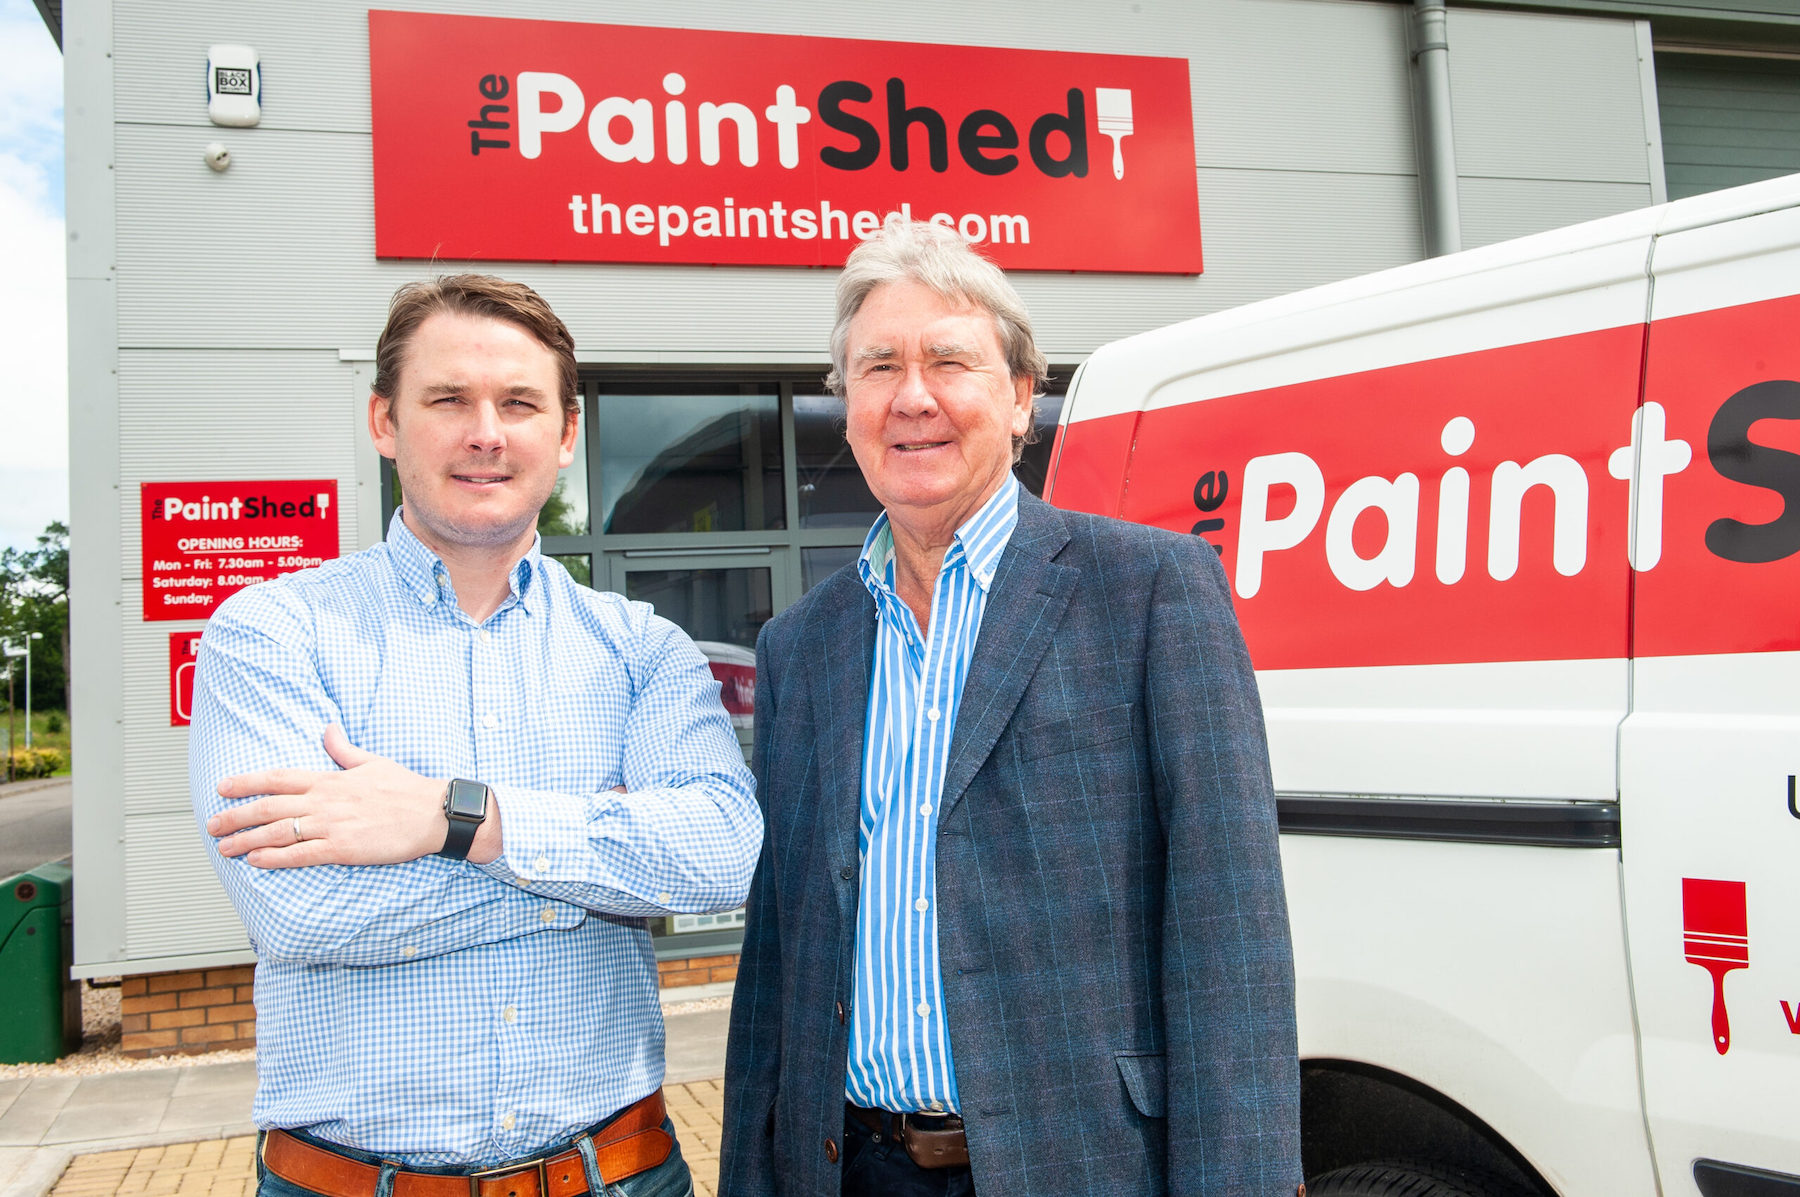 Brewers buys The Paint Shed strengthening independent paint retail market